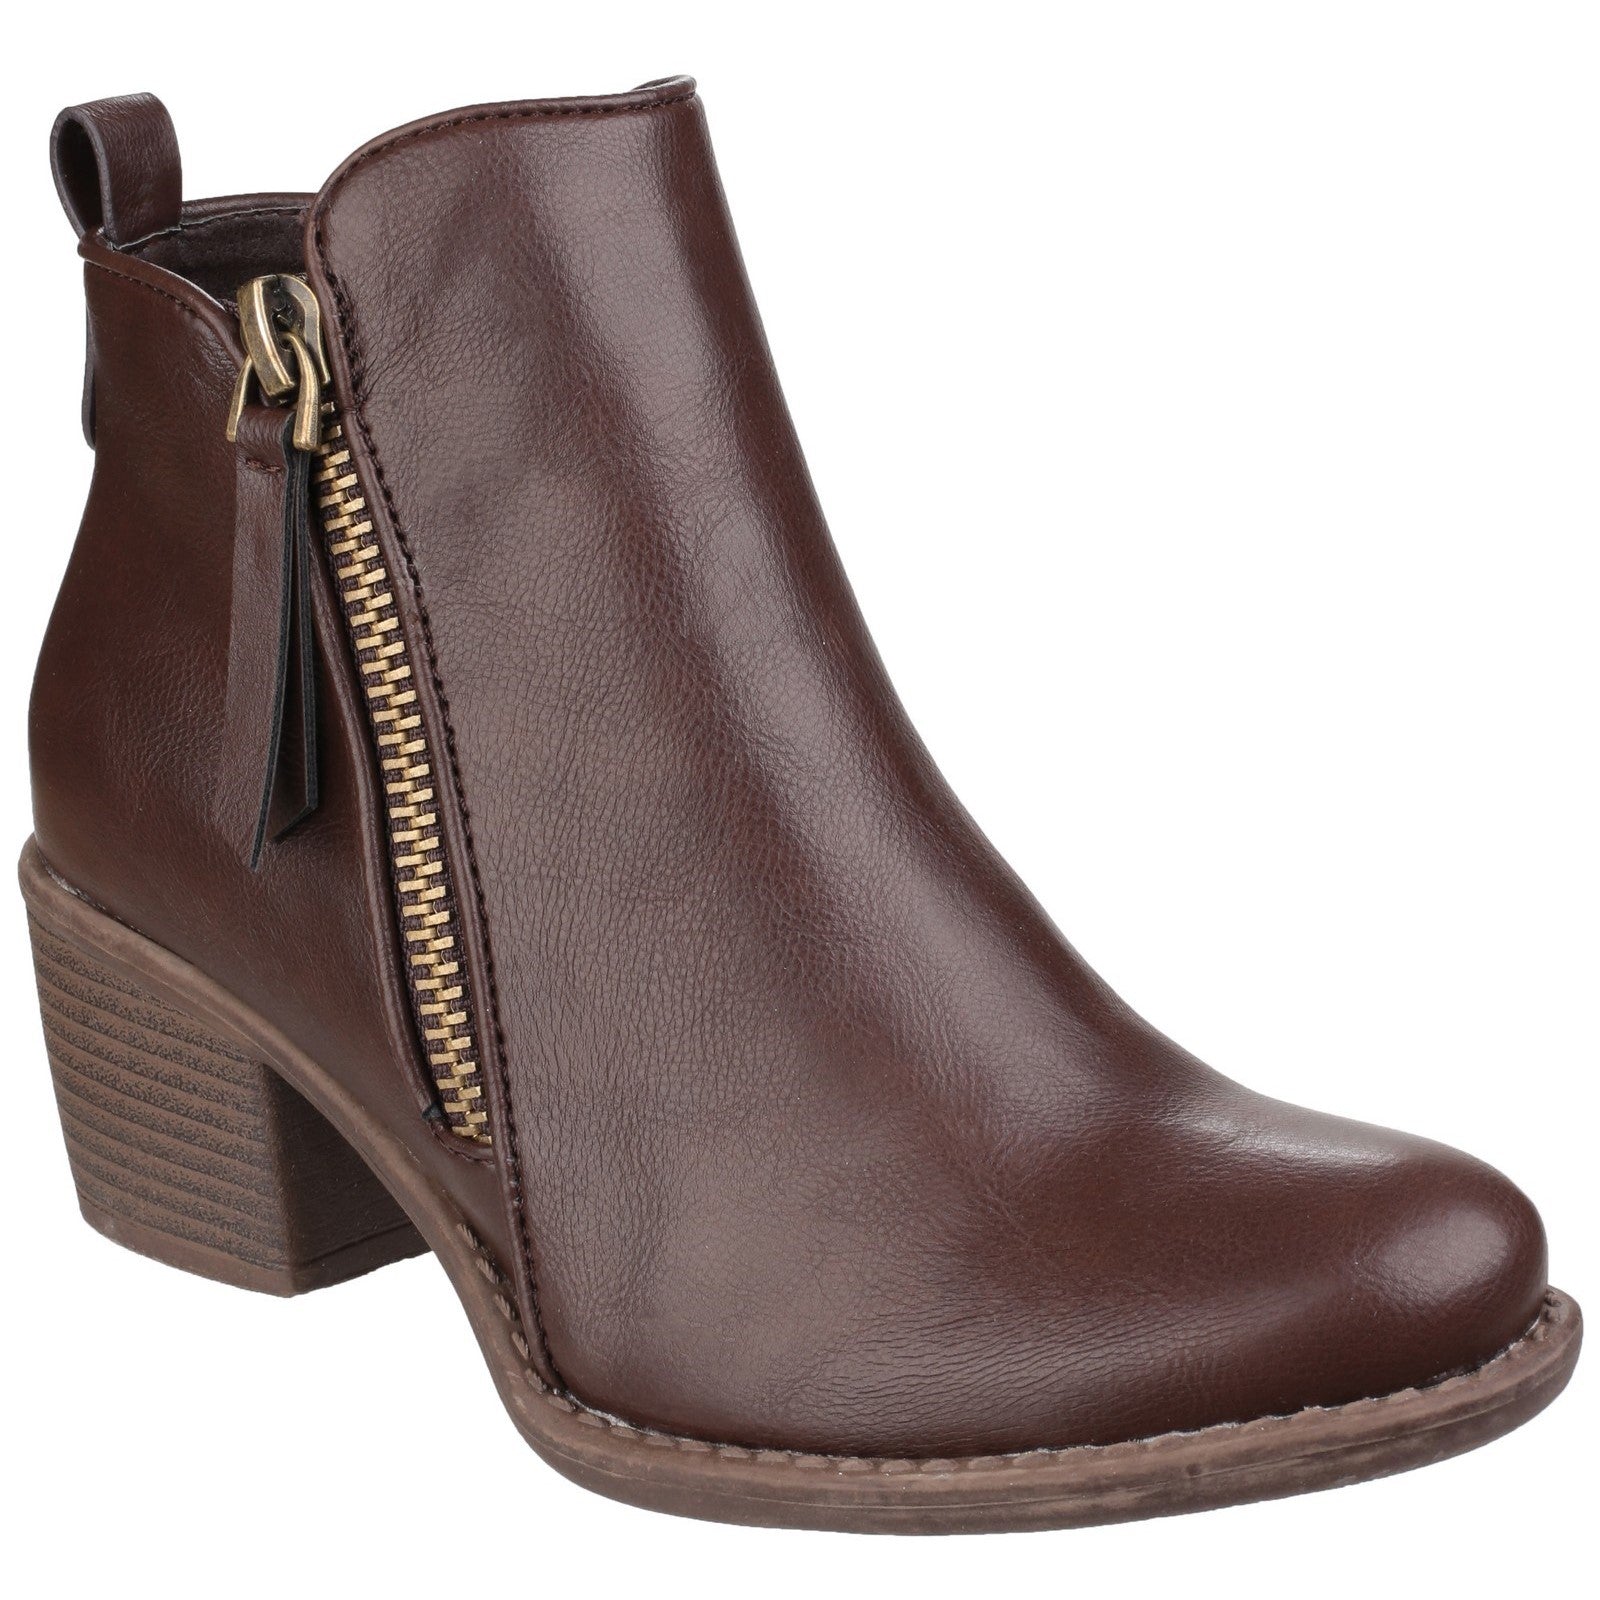 Divaz Dench Zip Up Ankle Boot